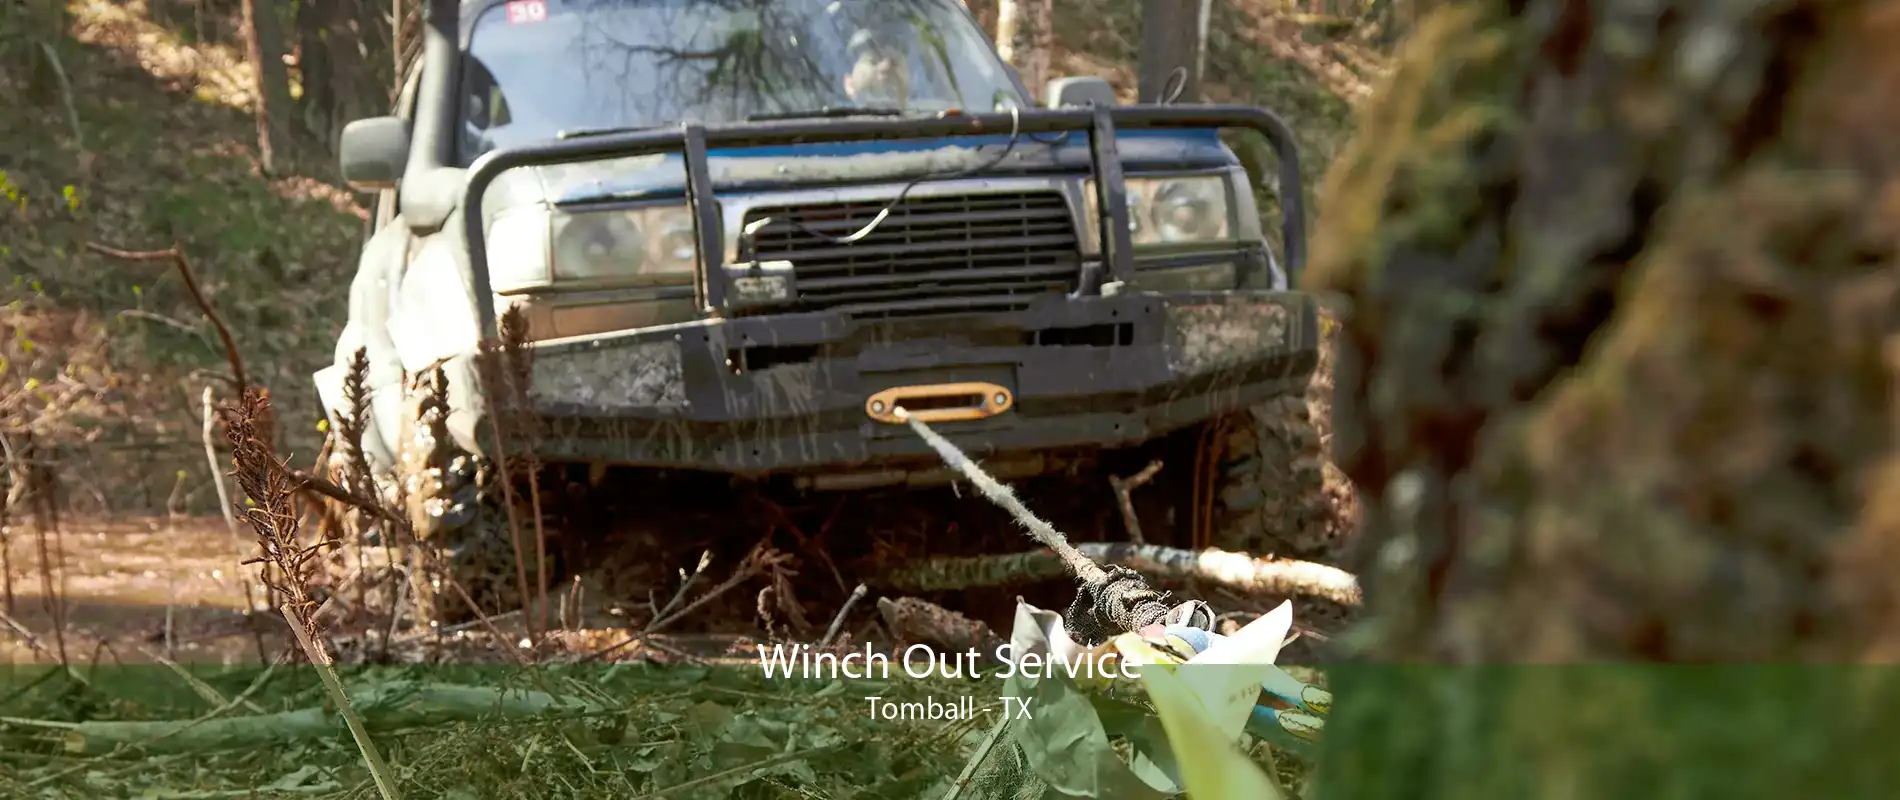 Winch Out Service Tomball - TX